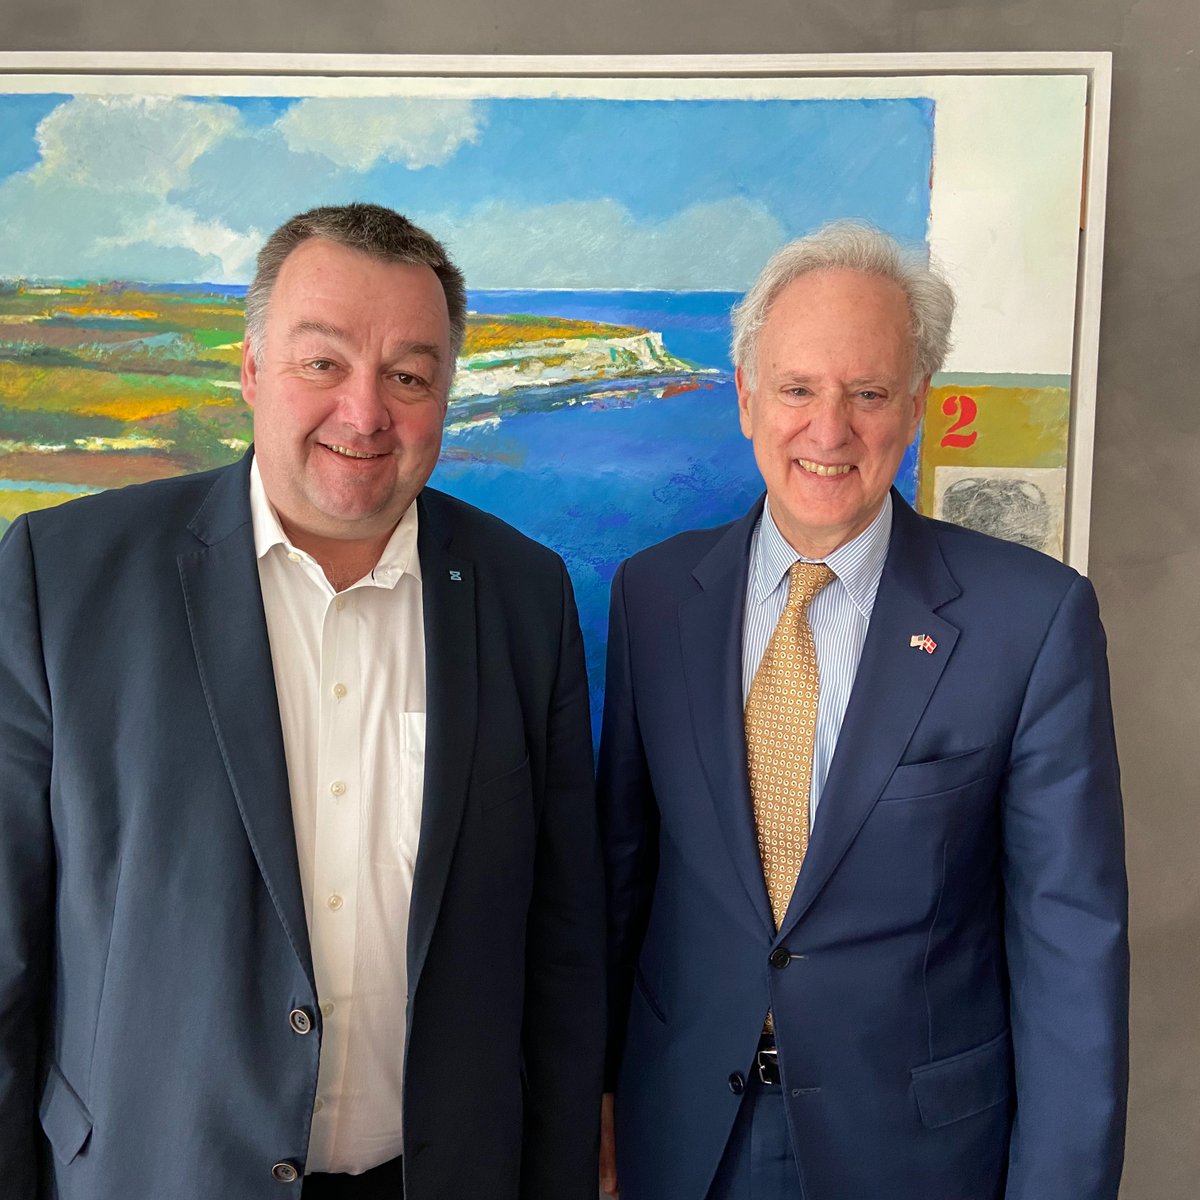 Thank you @danskmetal President Claus Jensen for the discussion on the importance of advancing the emerging technologies of AI, quantum and the green transition in industry- areas of strong cooperation between US and Denmark.